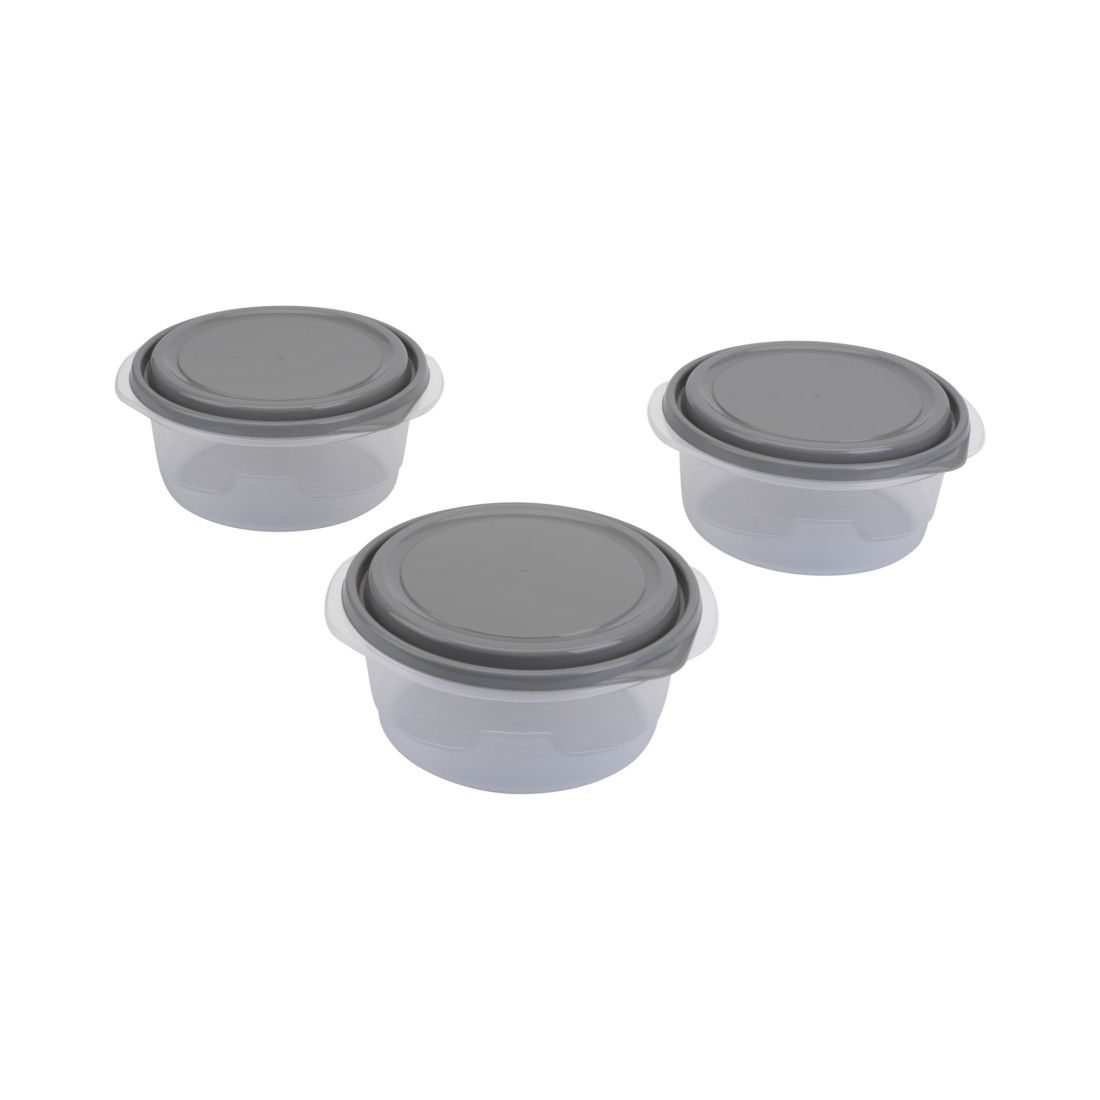 GoodCook EveryWare Food Container 3-pack Set Large Bowl